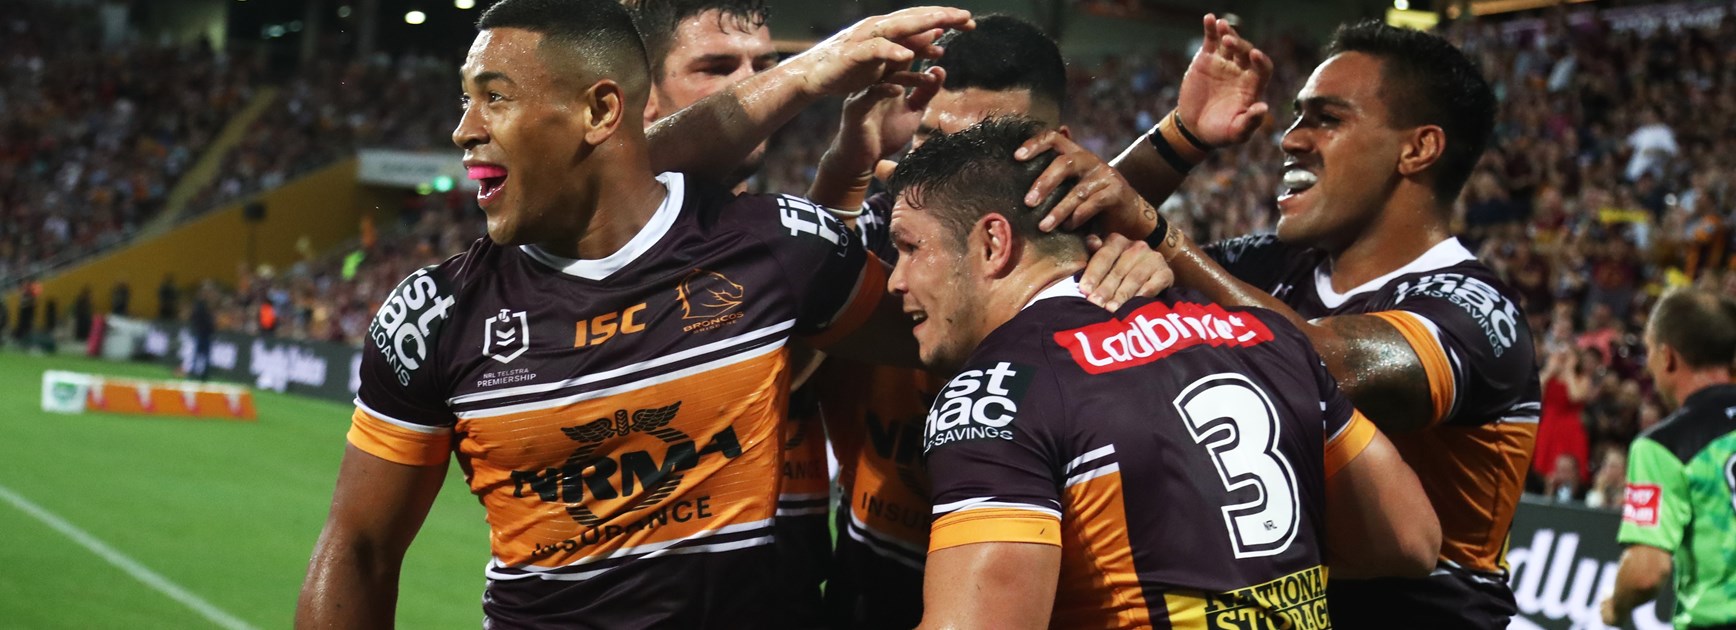 The Broncos celebrate a try.